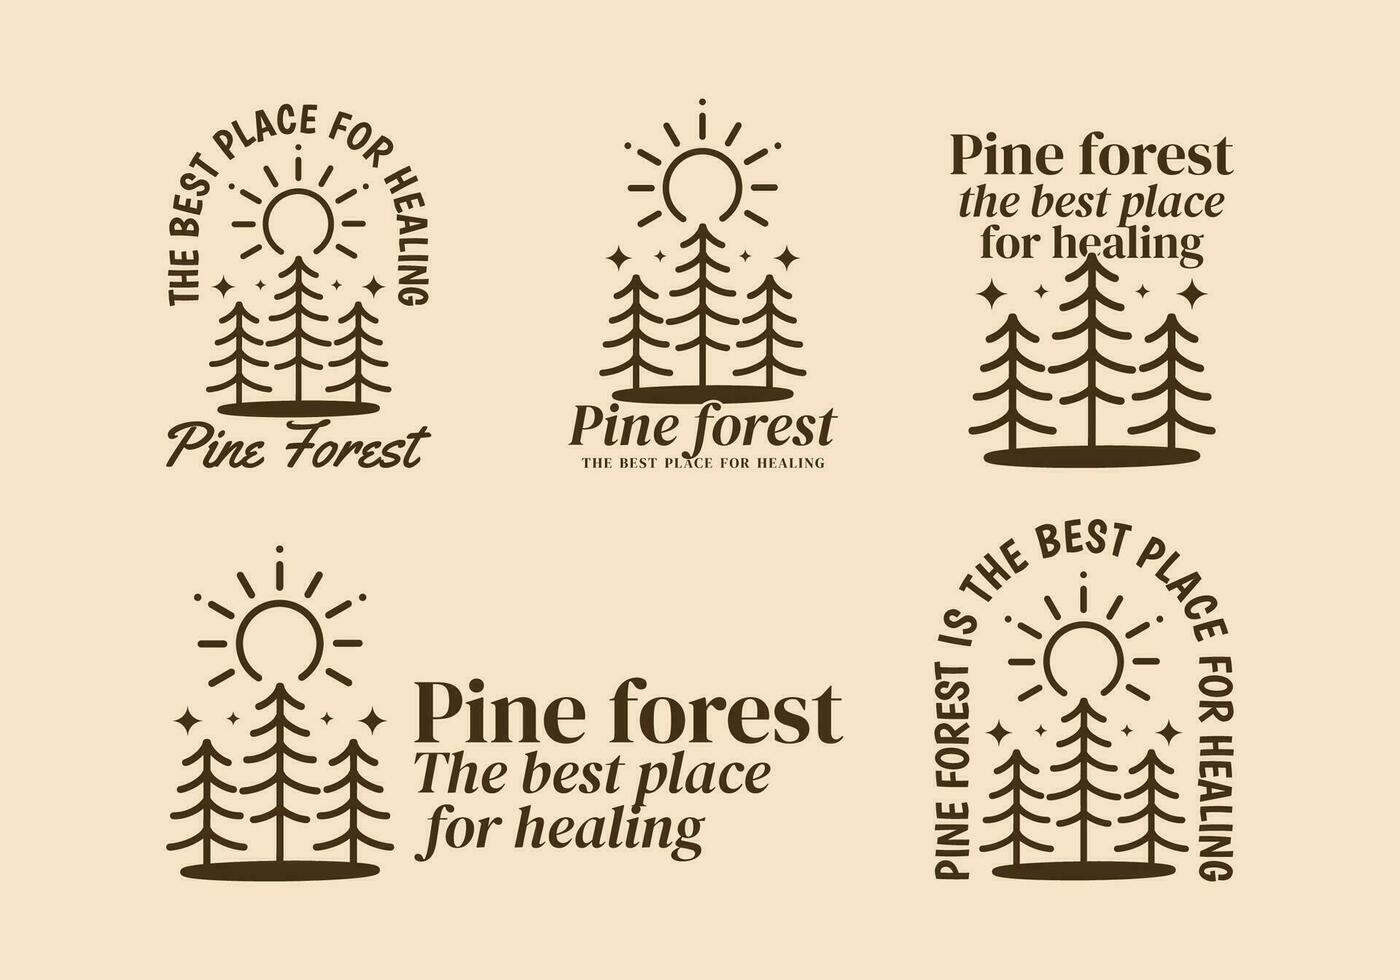 Pine forest, the best place for healing. Line art illustration design of pine trees vector